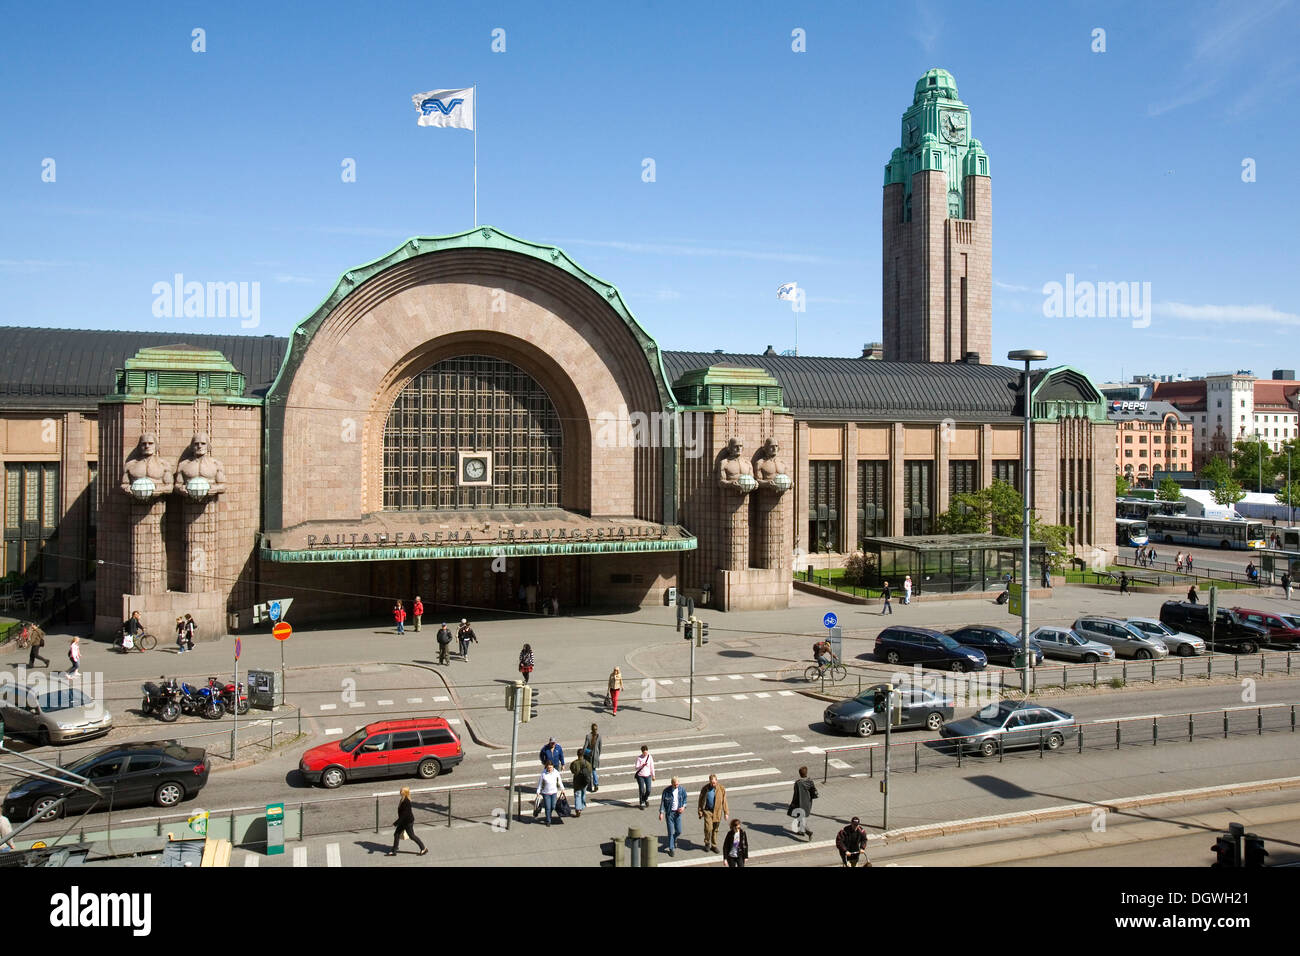 Central station of Helsinki, completed in 1919 according to the plans of architect Eliel Saarinen, Helsinki, Finland, Europe Stock Photo